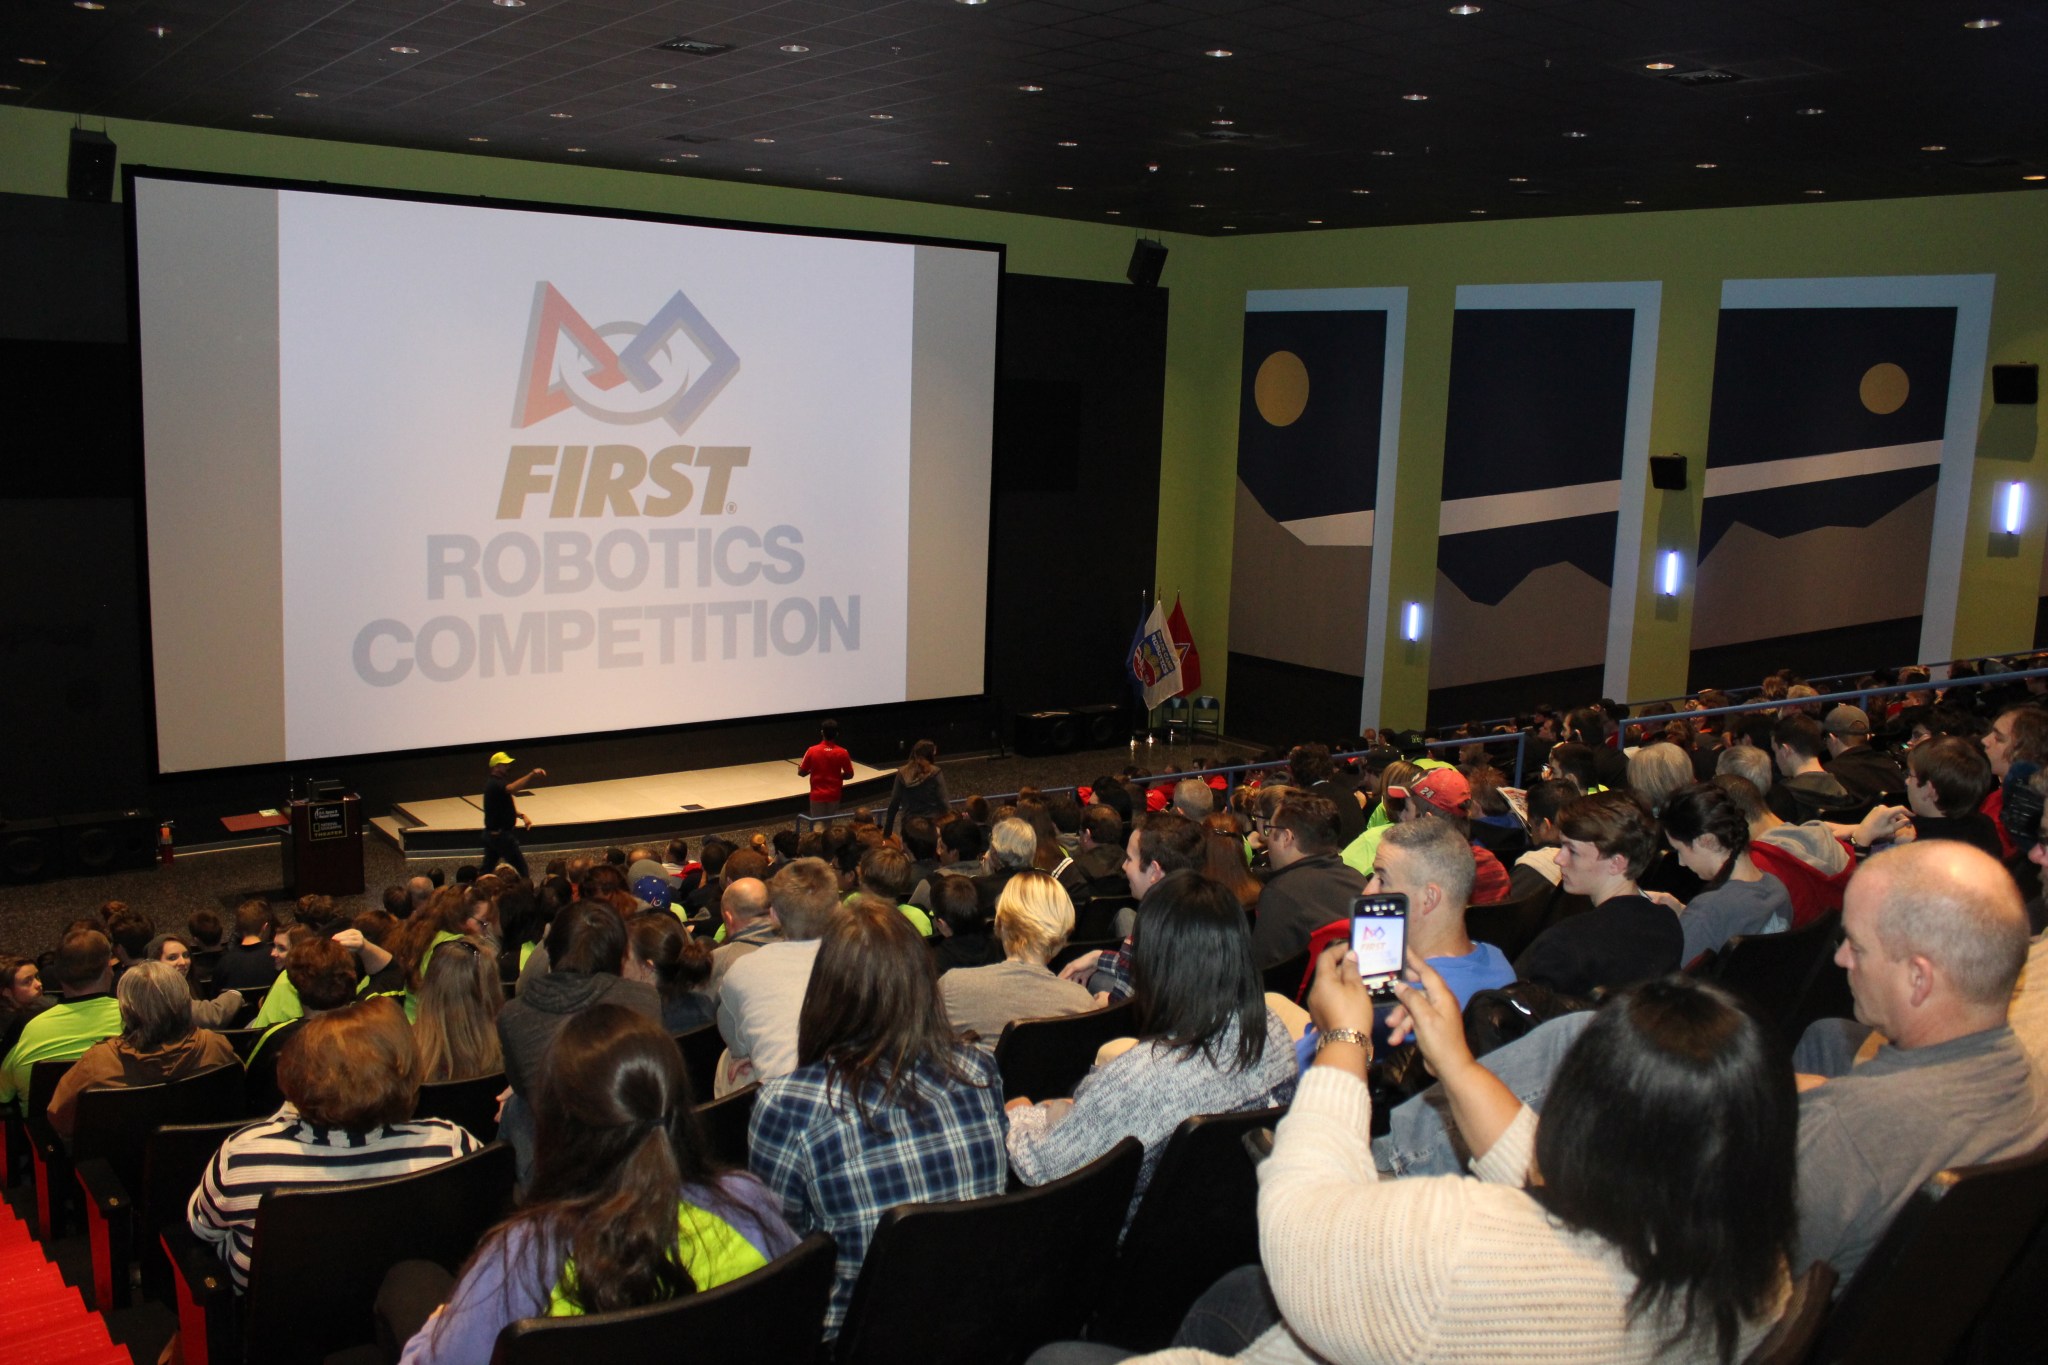 The 2018 FIRST Robotics Kick-Off event will be Jan. 6 at the U.S. Space & Rocket Center in Huntsville, Alabama.